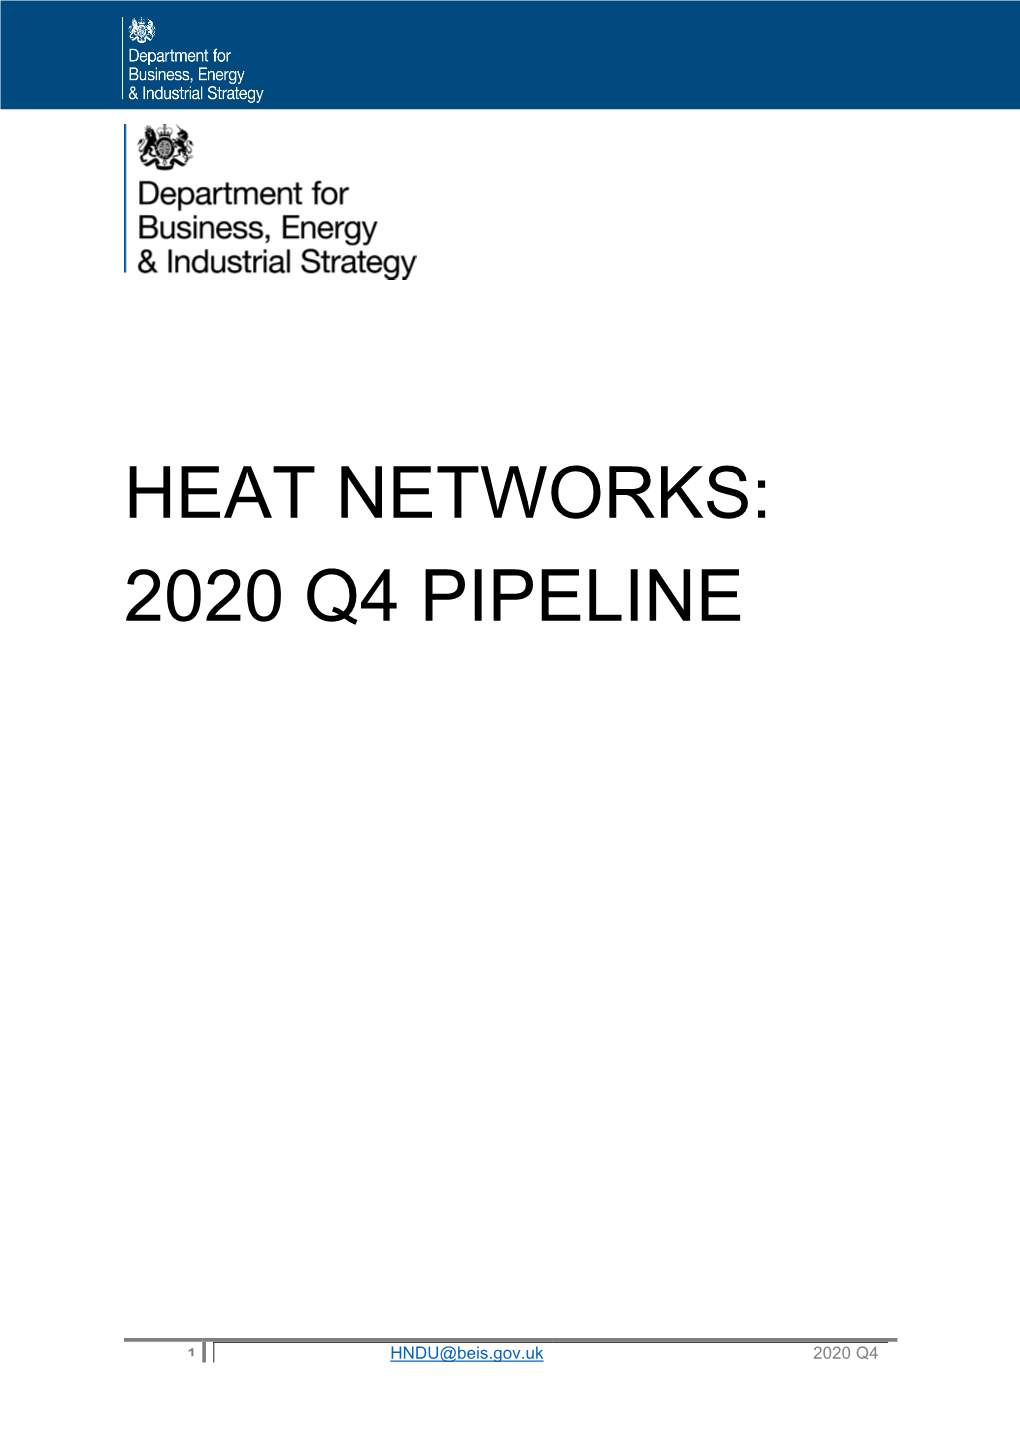 Heat Networks Project Pipeline October to December 2020